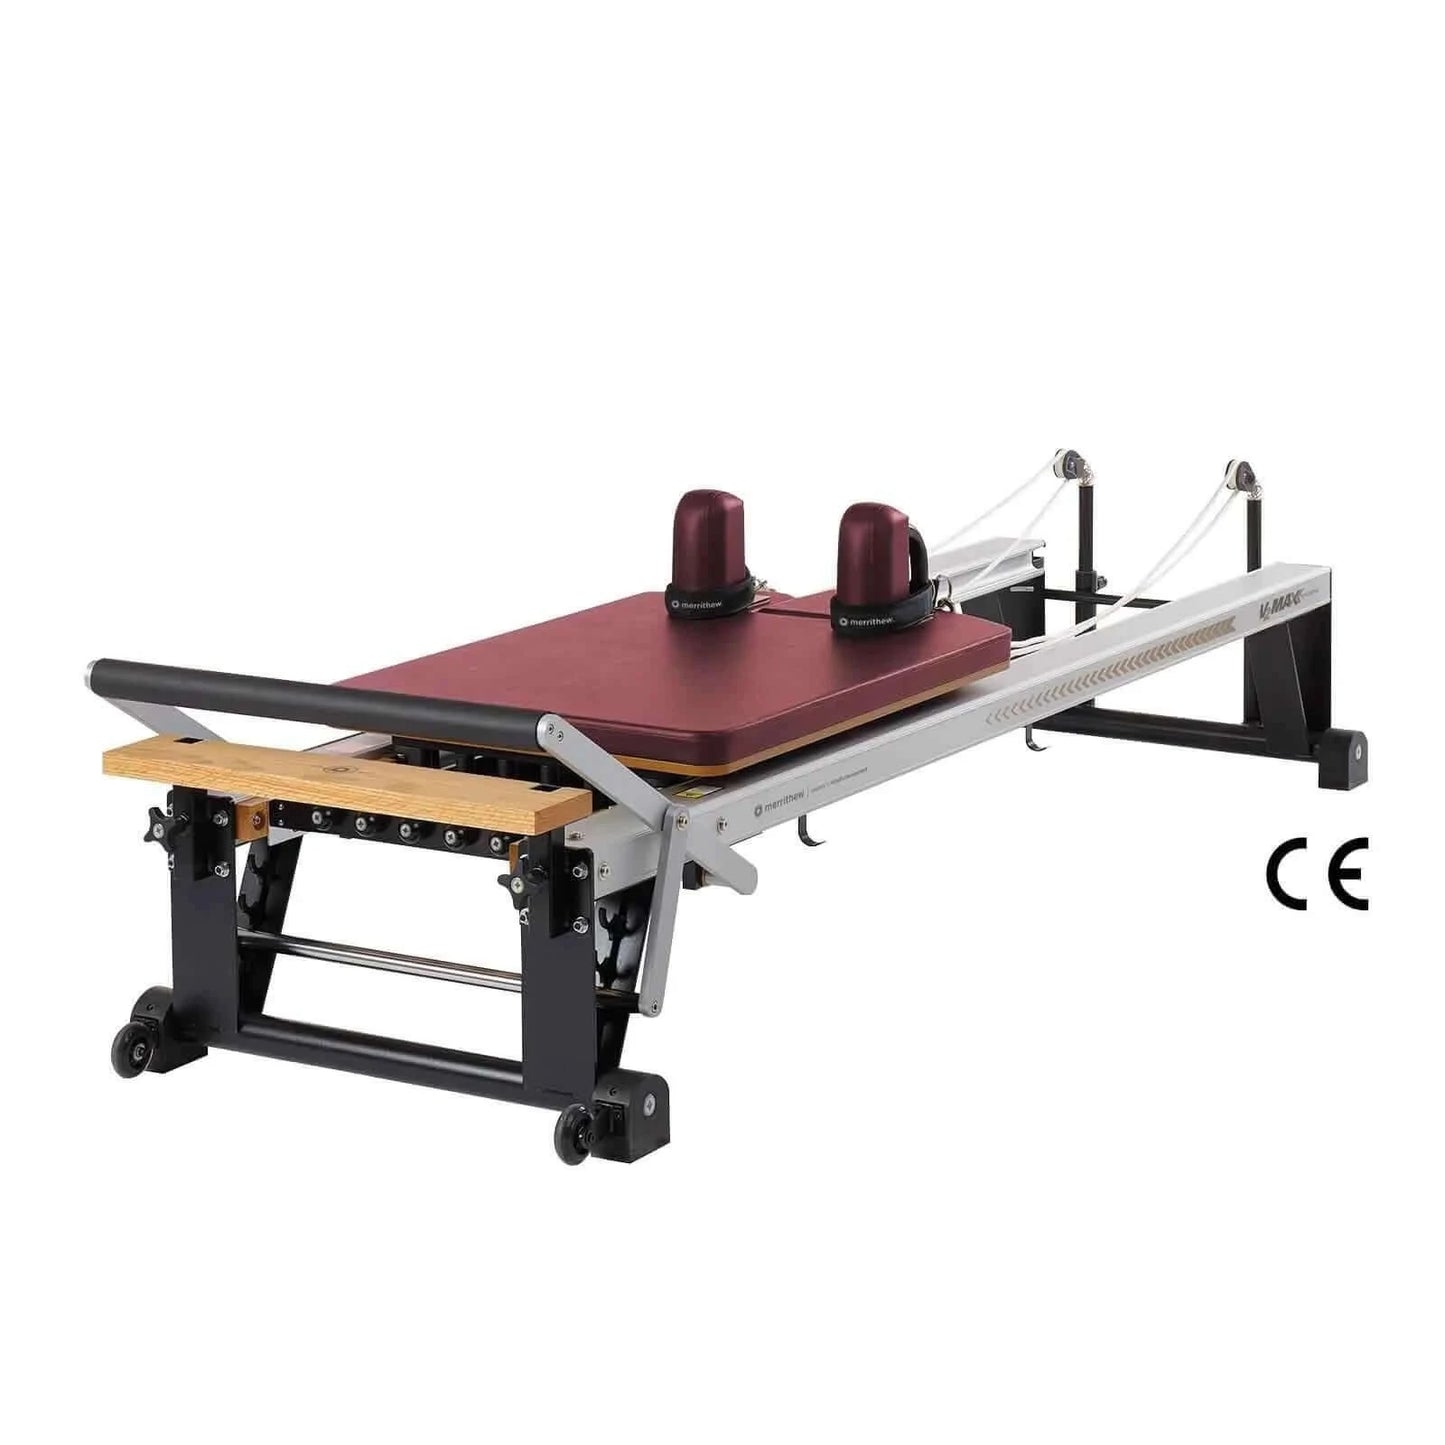 Red Truffle Merrithew™ Pilates V2 Max™ Reformer Machine by Merrithew™ sold by Pilates Matters® by BSP LLC